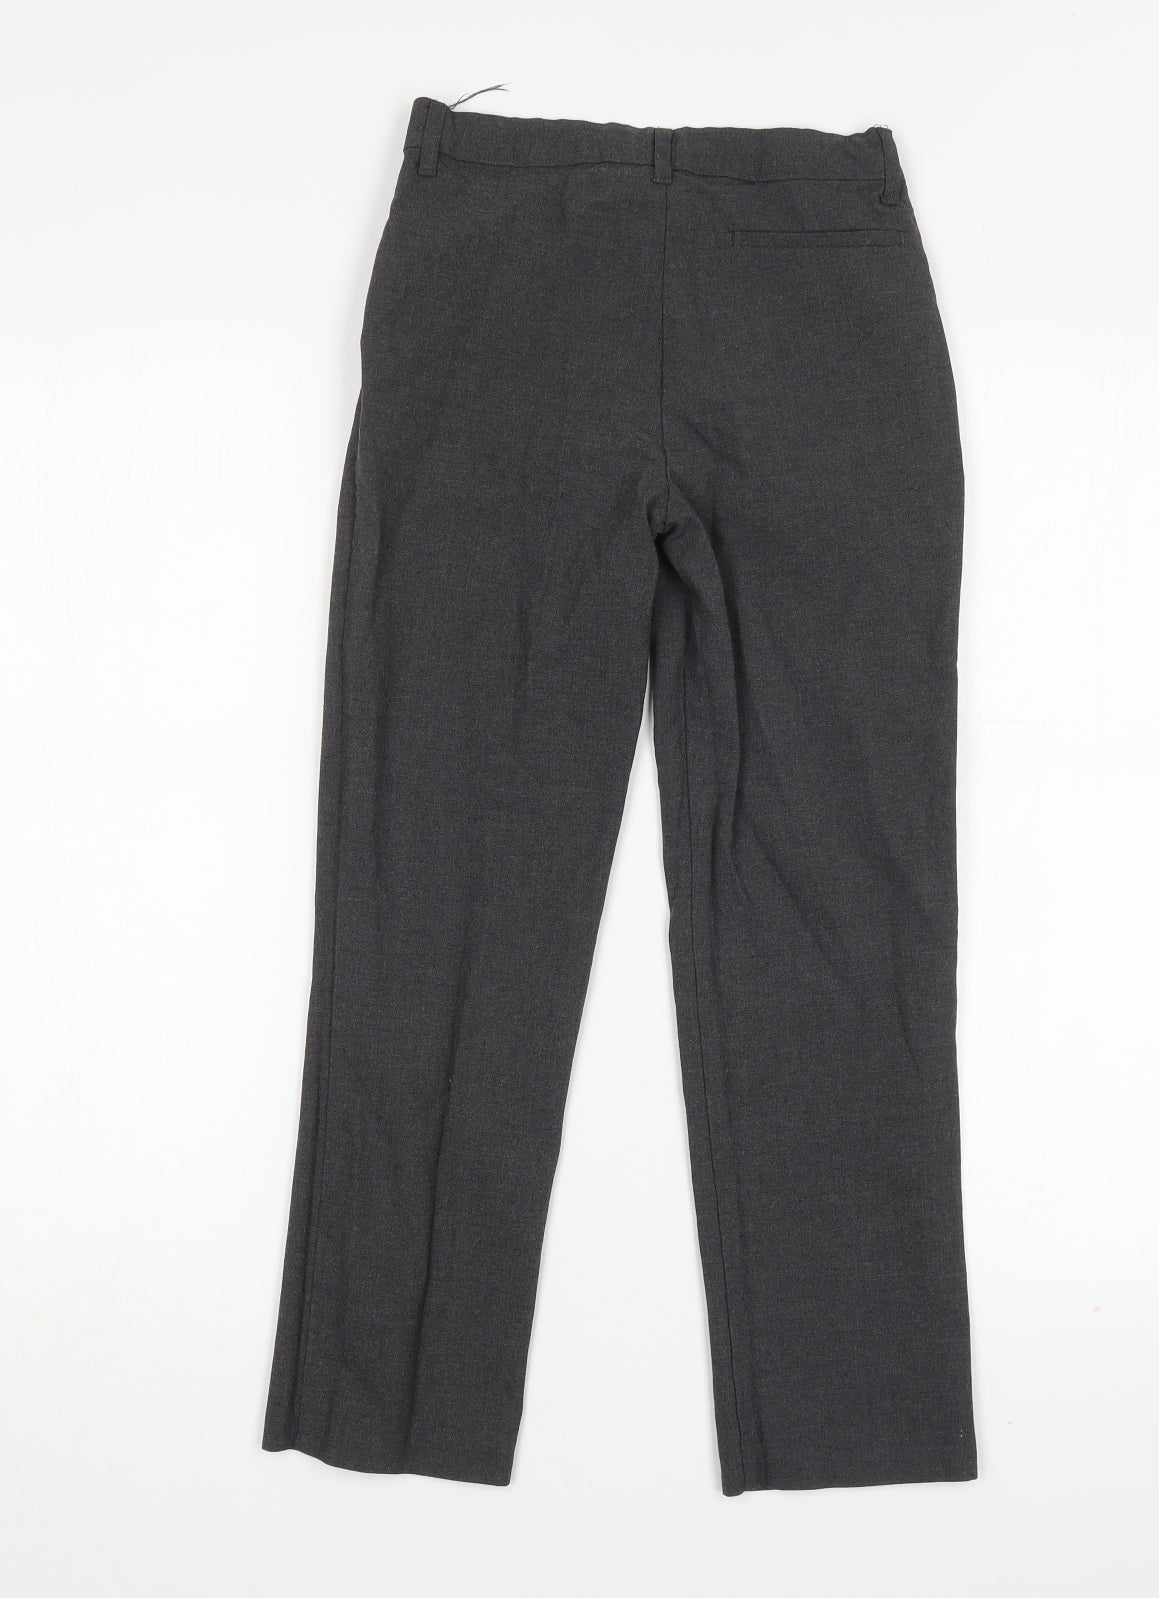 M&S Boys Grey  Polyester Dress Pants Trousers Size 9-10 Years  Regular